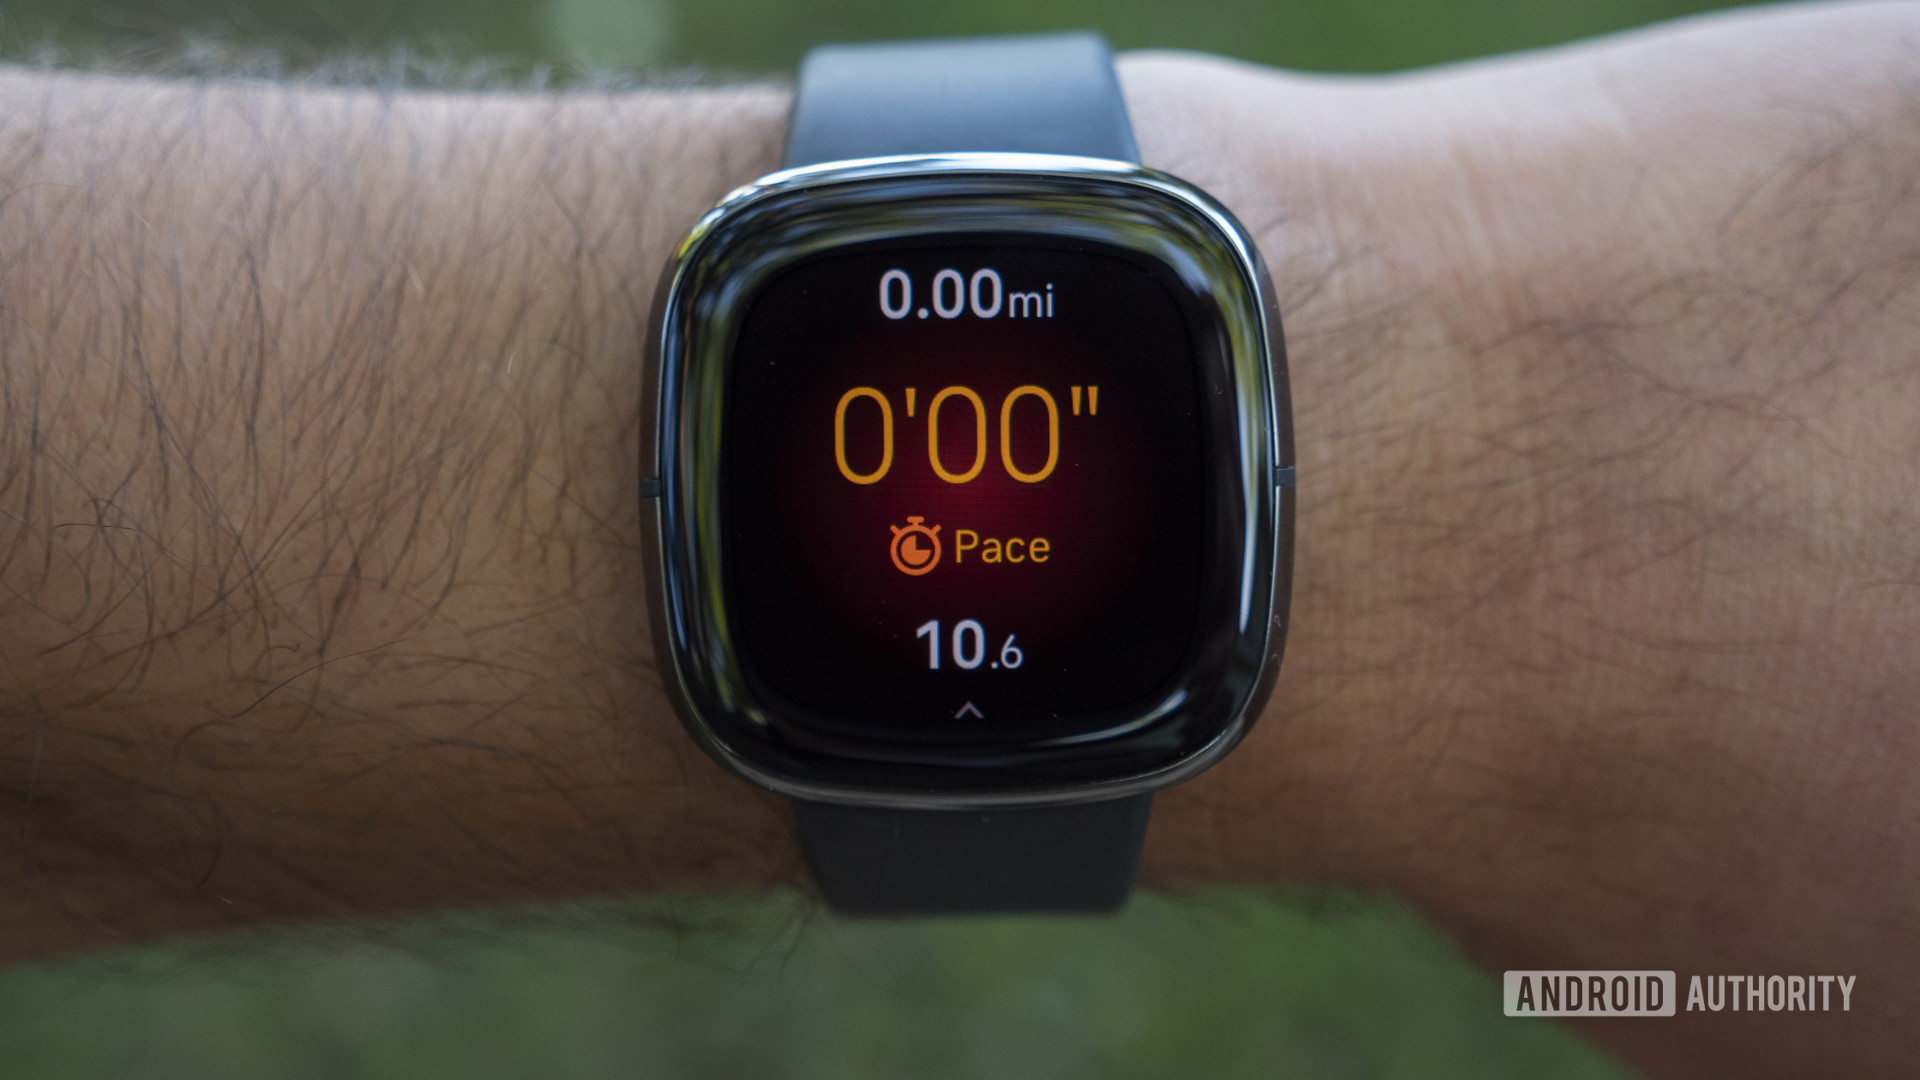 How to track exercises and workouts devices - Android Authority